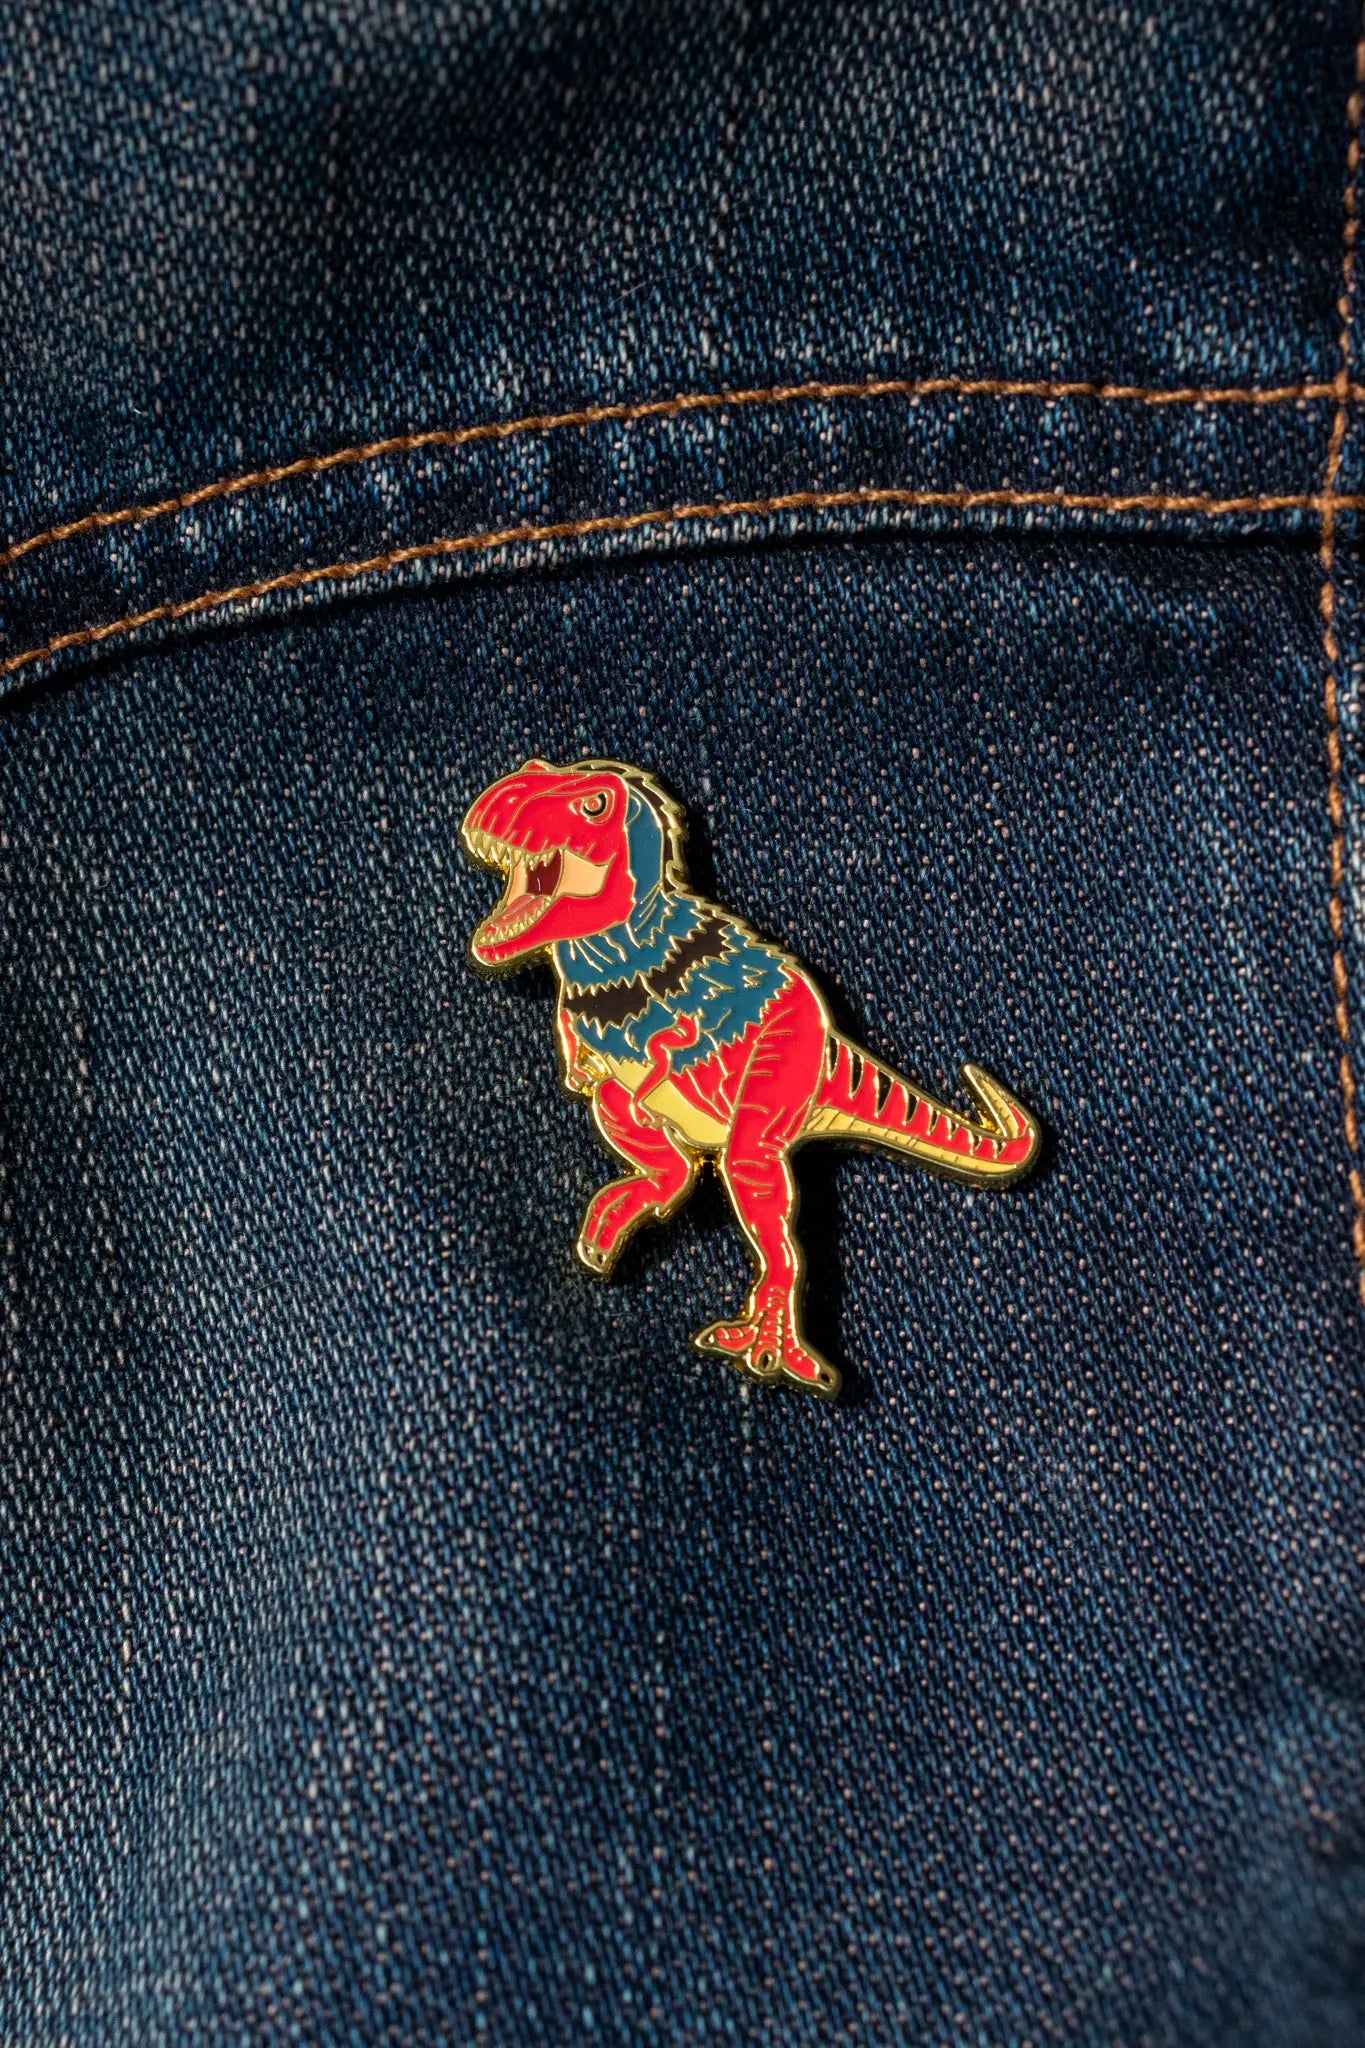 Tyrannosaurus Rex Pin (with Feathers) - Stemcell Science Shop